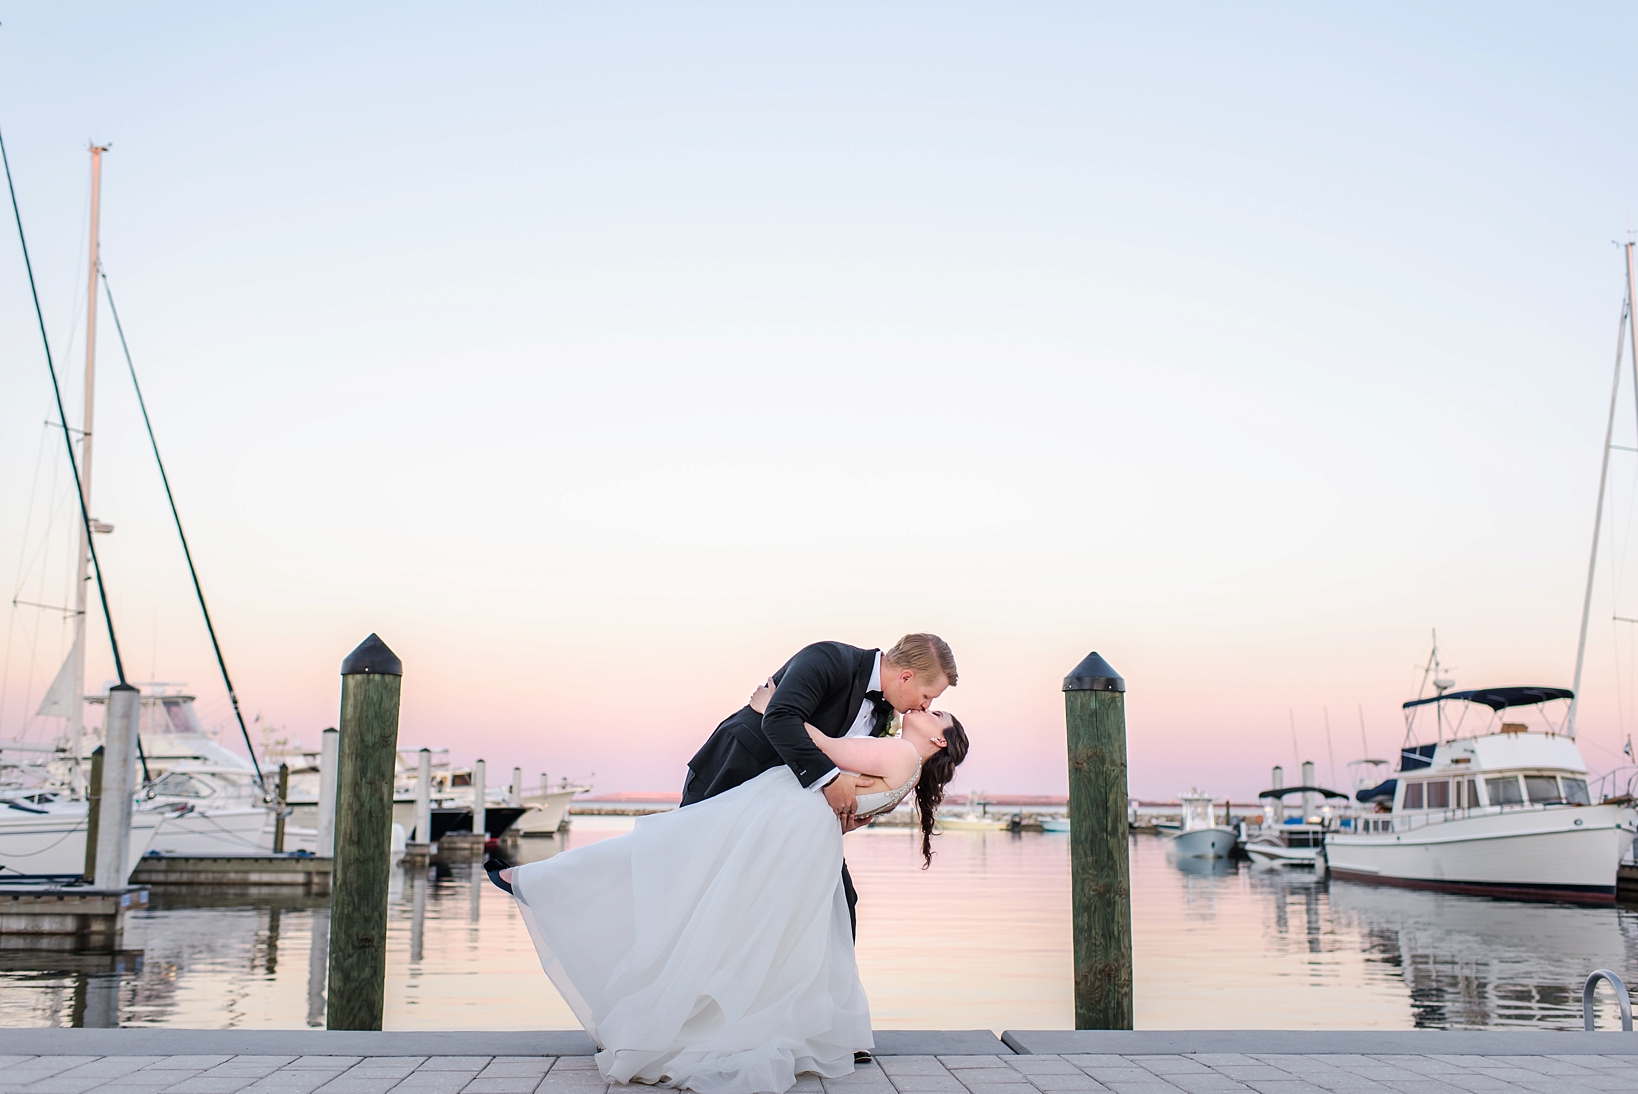 Stunning sunset with the Bride and Groom dip kissing by Sarah & Ben Photography